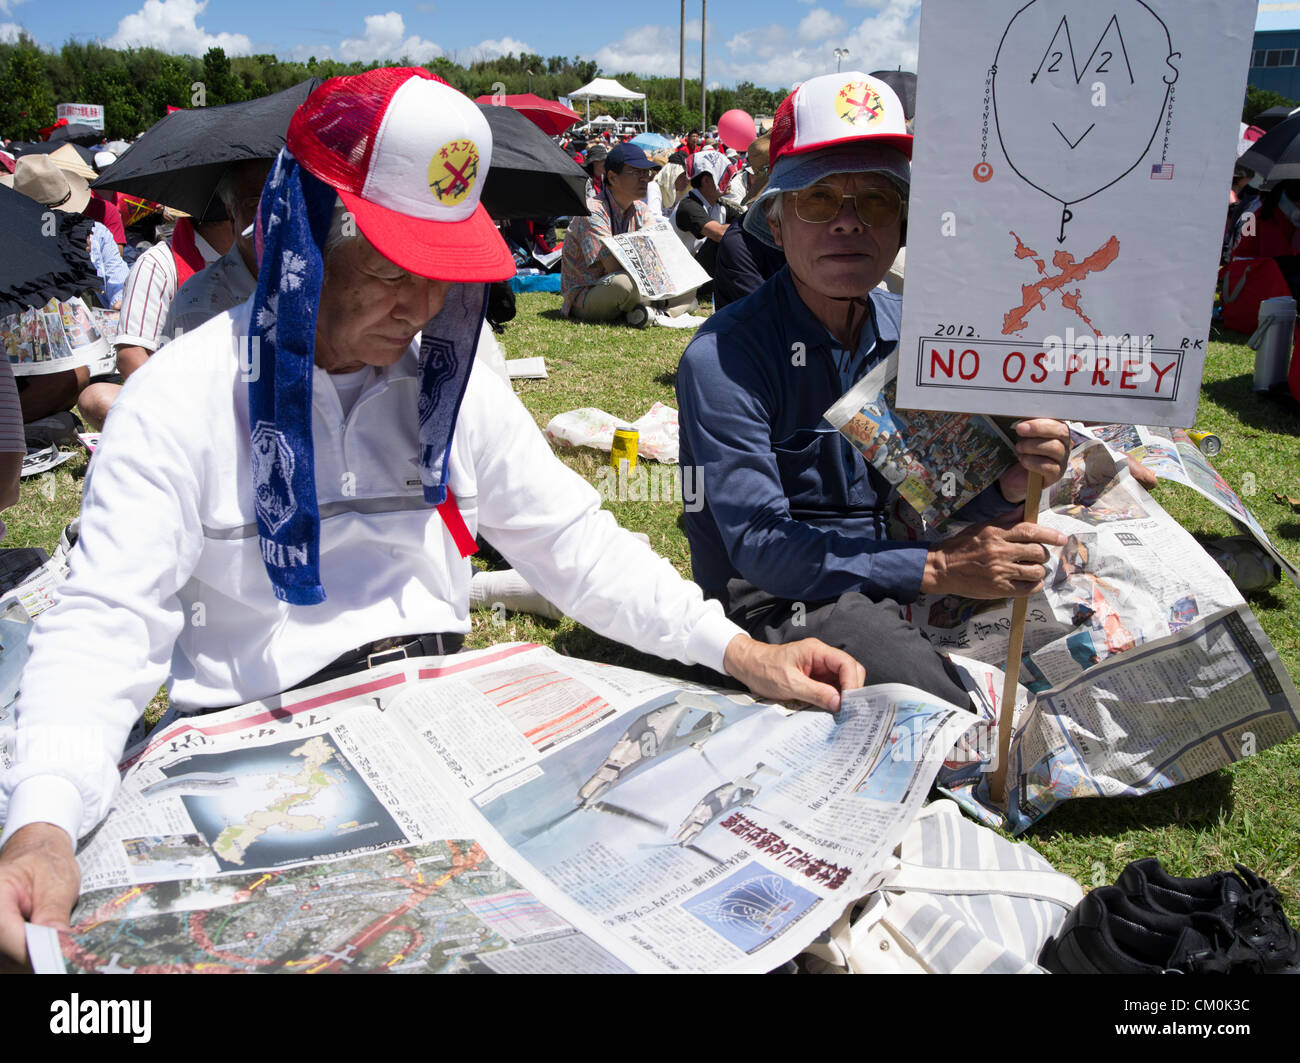 US Marine Corps MV-22 Osprey helicopters are scheduled to be based at Marine Corps Air Station Futenma in central Okinawa. In Ginowan City, tens of thousands of locals protest against the poor safety record of the Osprey and the close location of Futenma to residential areas. 9/9/2012 Stock Photo